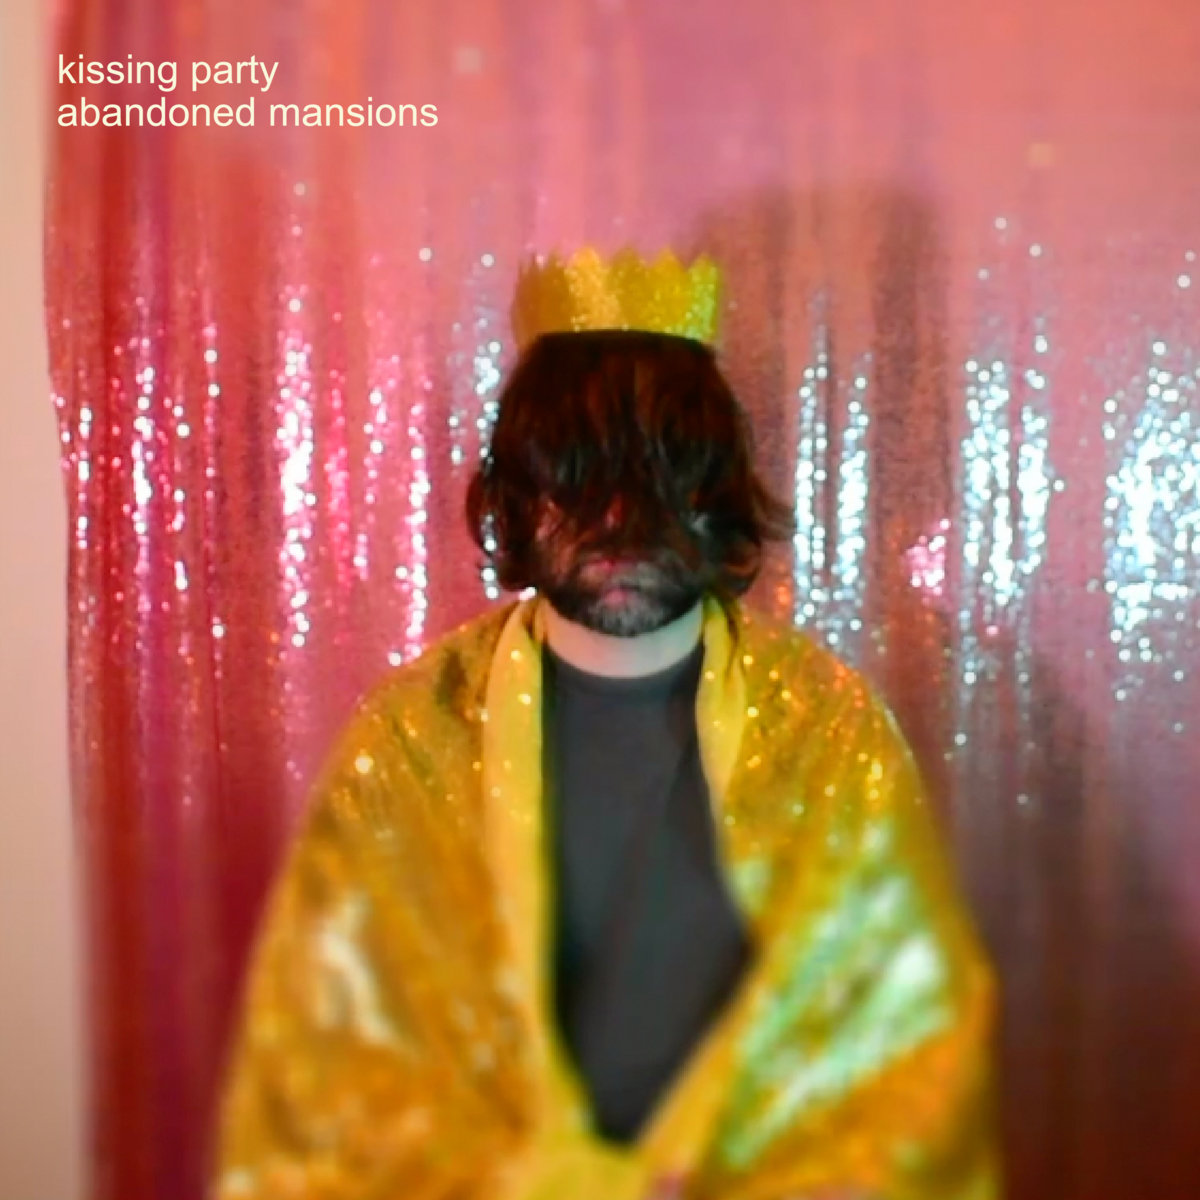 WL//WH NEW MUSIC: KISSING PARTY “Abandoned Mansions” (Official Video) – WL//WH whitelight-whiteheat.com/wl-wh-new-musi… via @https://twitter.com/fabrizio_lusso?lang=en @kissingparty #kissingparty #beachgoth #bedroompop #darkwave #dreampop #indie #newwave #postpunk #shoegaze #sloppop #Denver